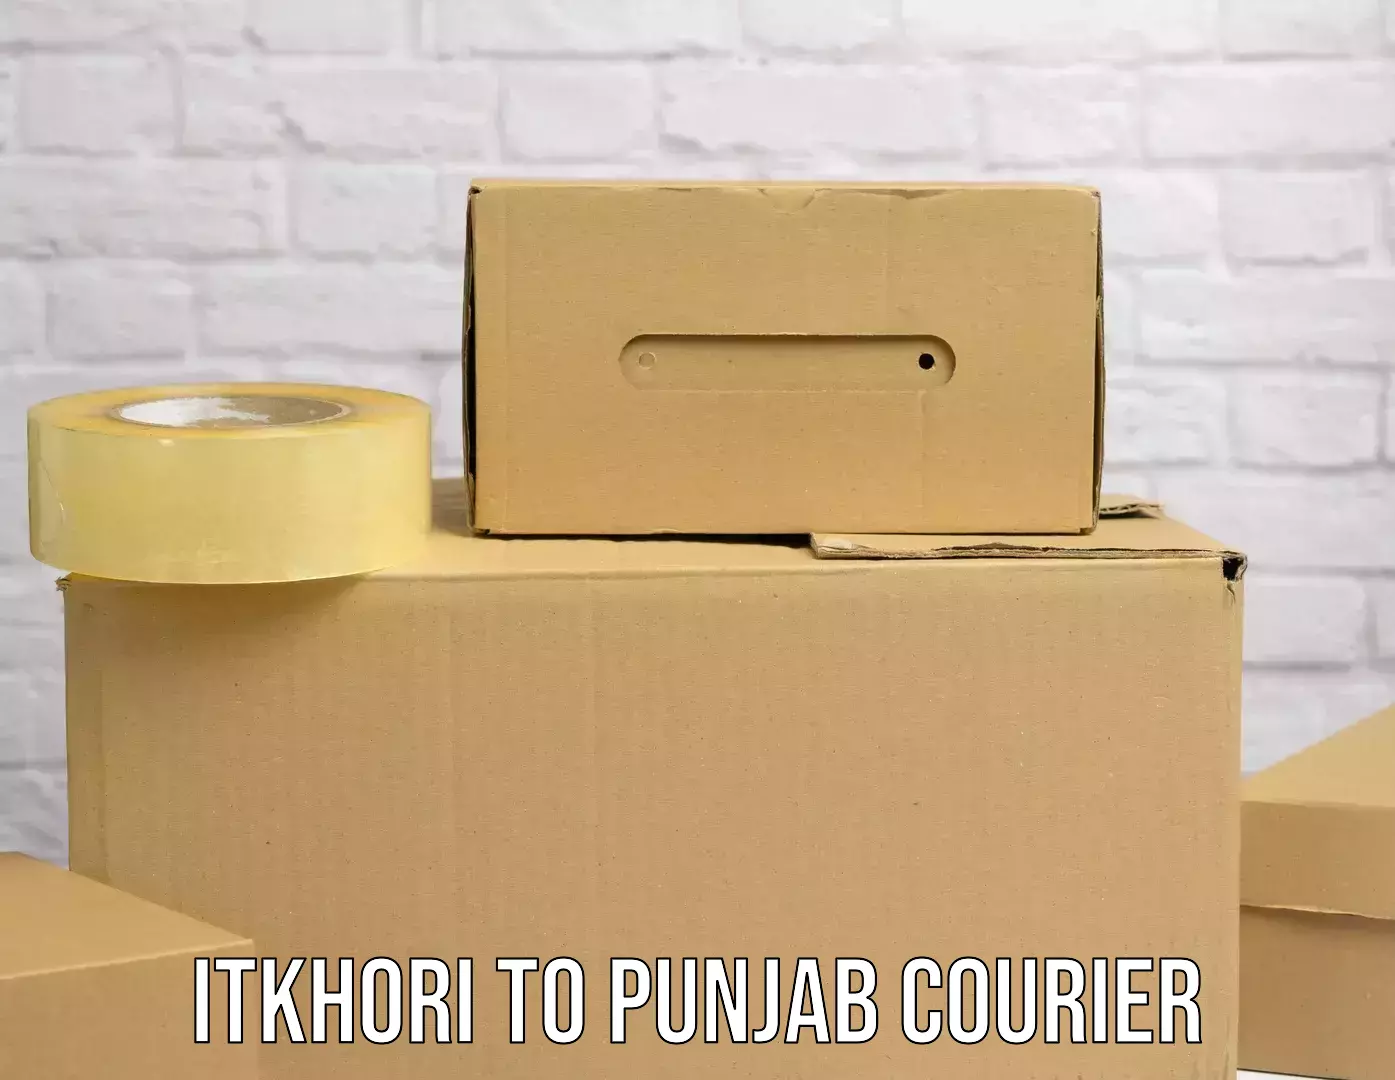 24-hour courier services Itkhori to Punjab